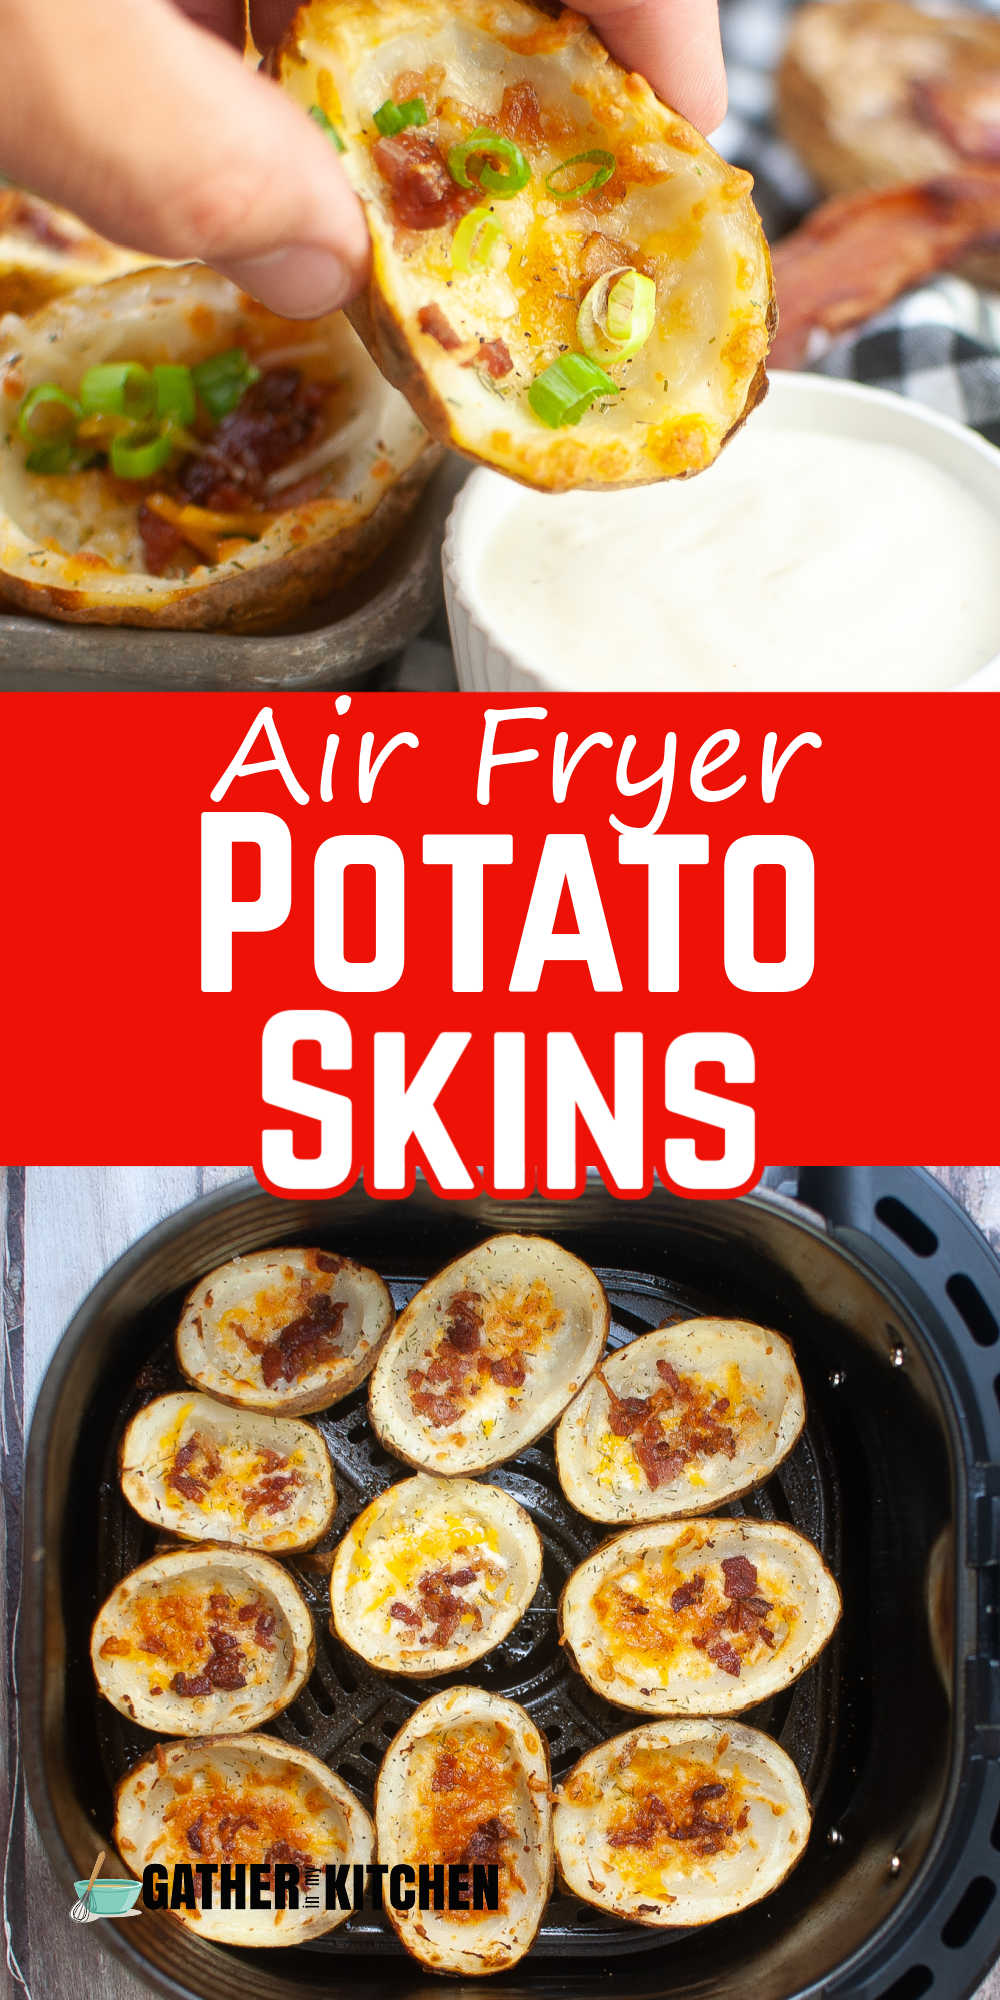 Pin image: top and bottom have pics of potato skins, middle says "Air Fryer Potato Skins".